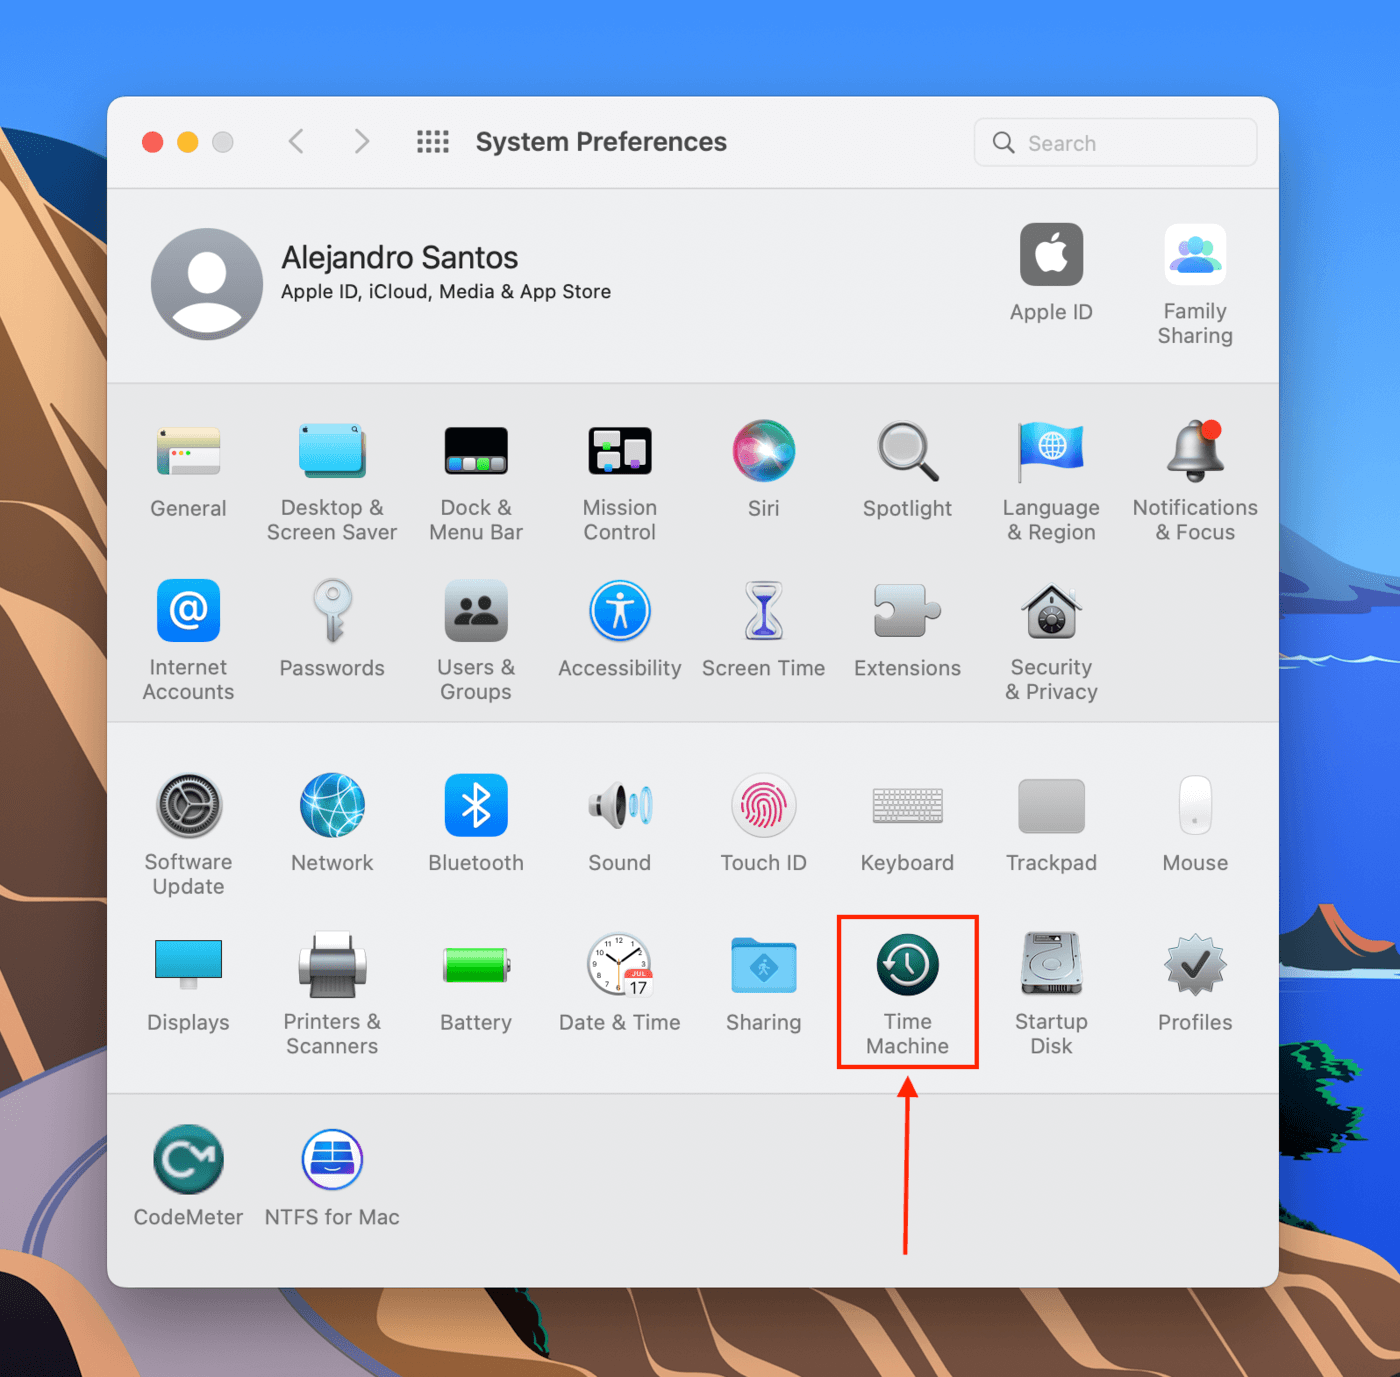 Time Machine icon in the System Preferences window